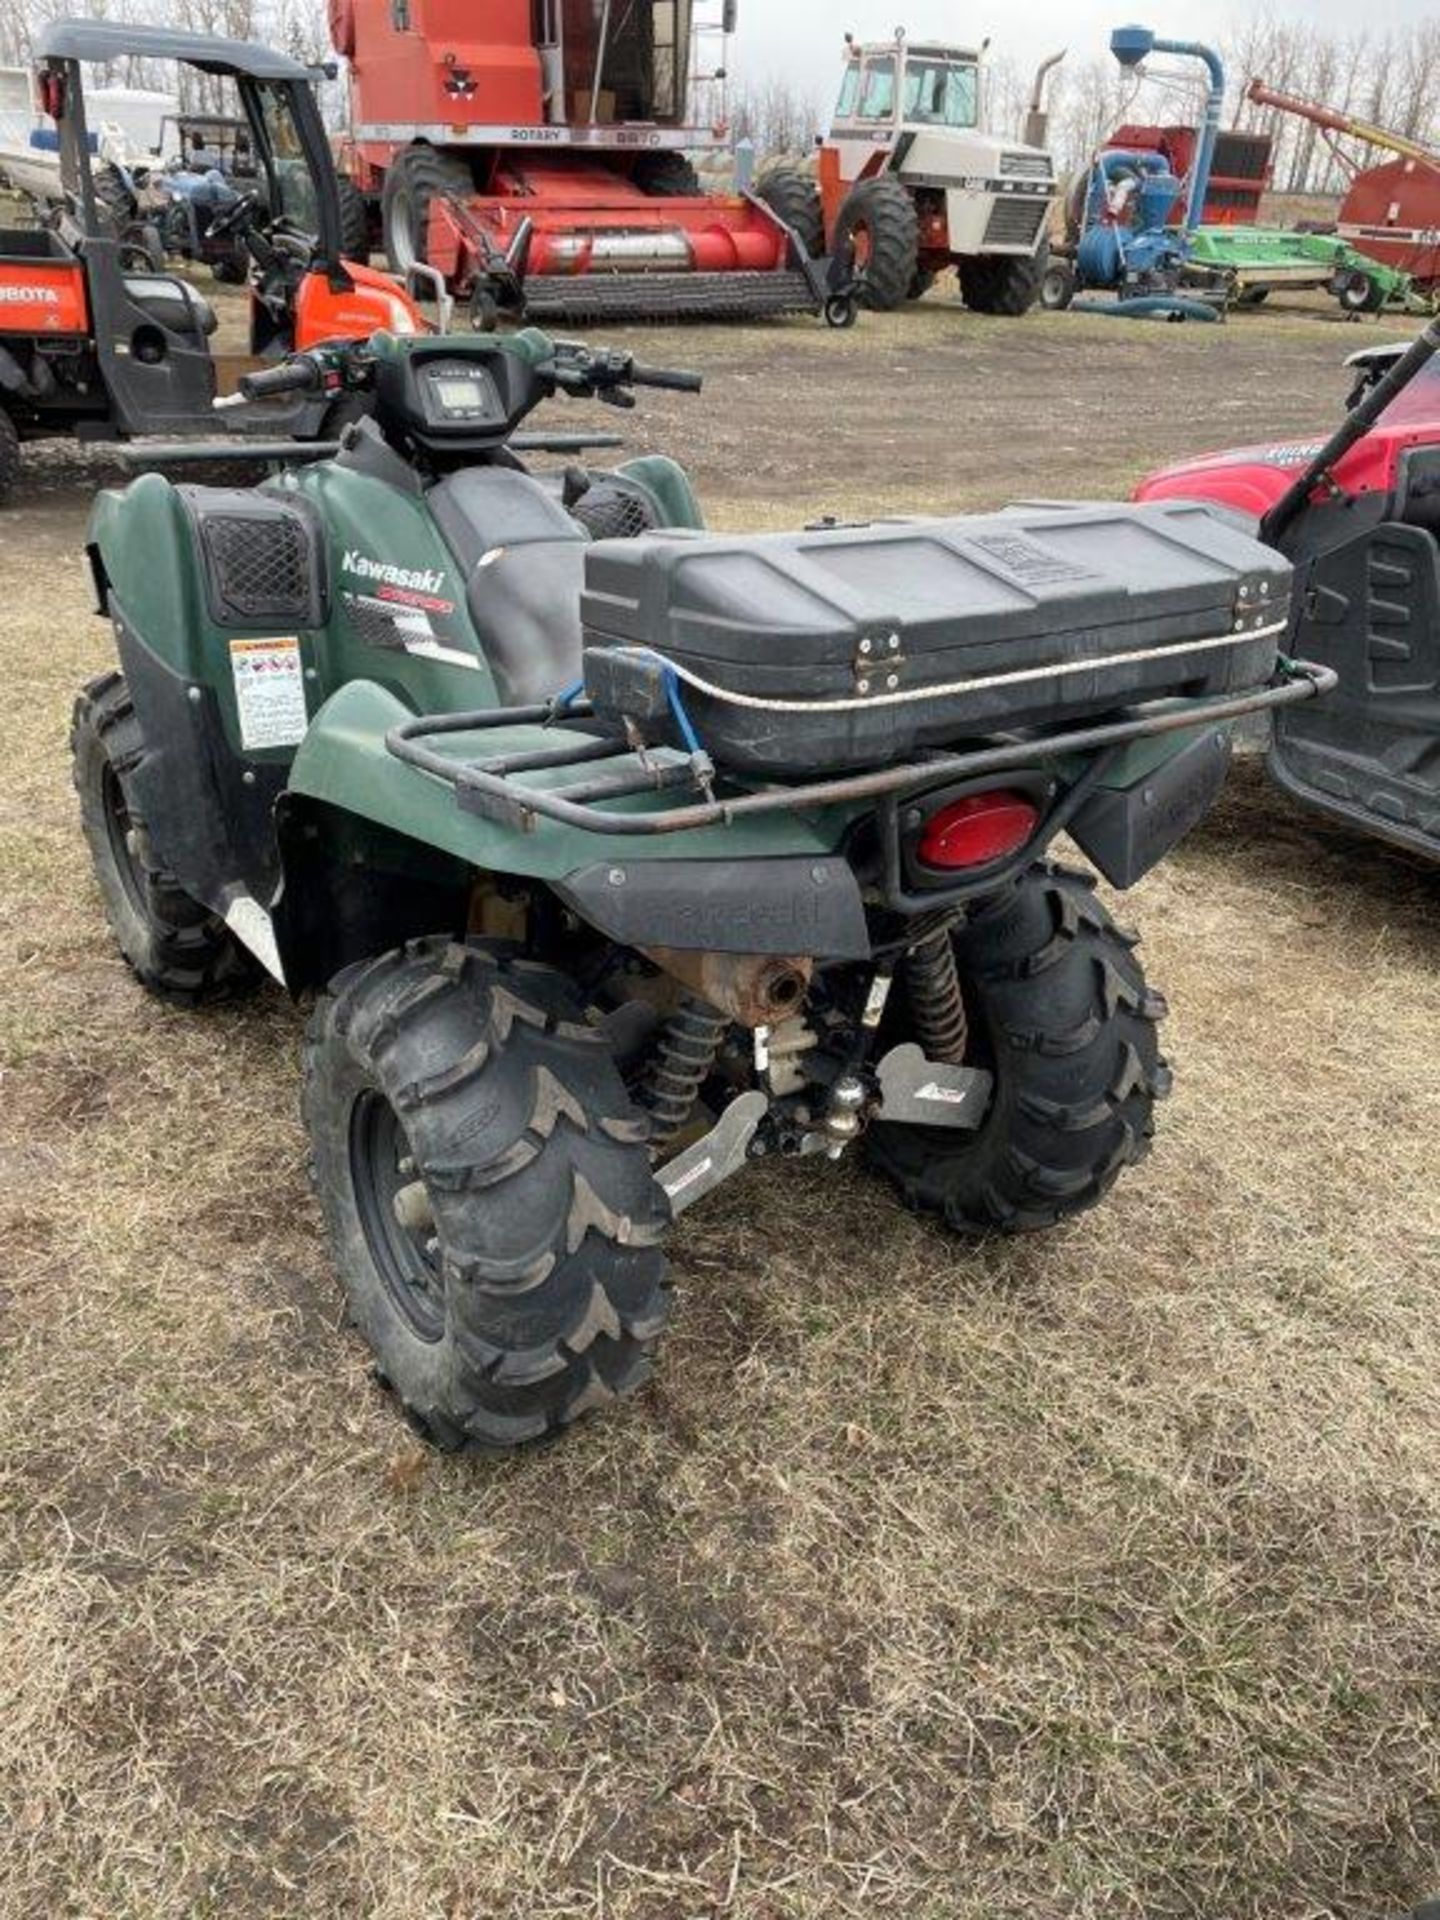 2007 KAWASAKI BRUTE FORCE 750 ATV 4X4 AUTO, RECENT CARB CLEAN, NEW BATTERY, 1762 KM'S SHOWING - Image 8 of 19